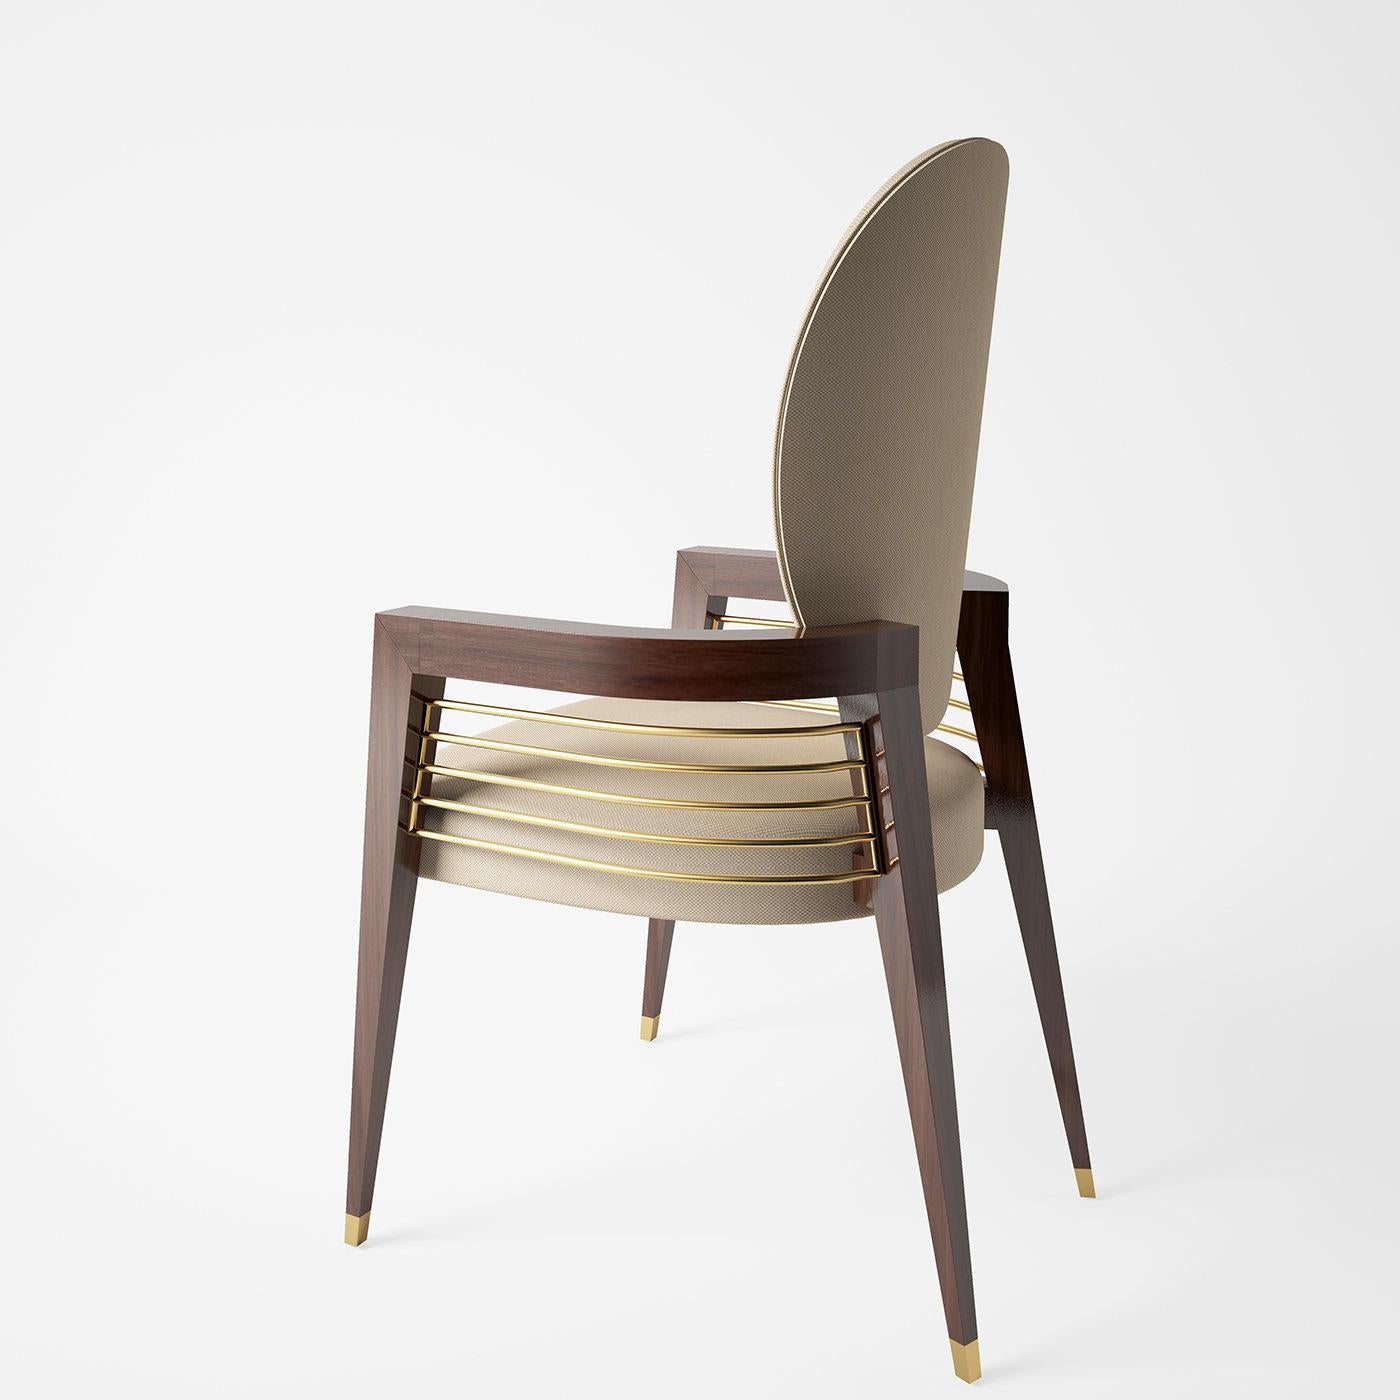 The perfect complement to the Venice Round Dining Table by the same designer, Valerio Andriani, this sublime armchair will add unparalleled charm and refinement to an elegant contemporary interior. Handcrafted of fine Walnut wood finished in a